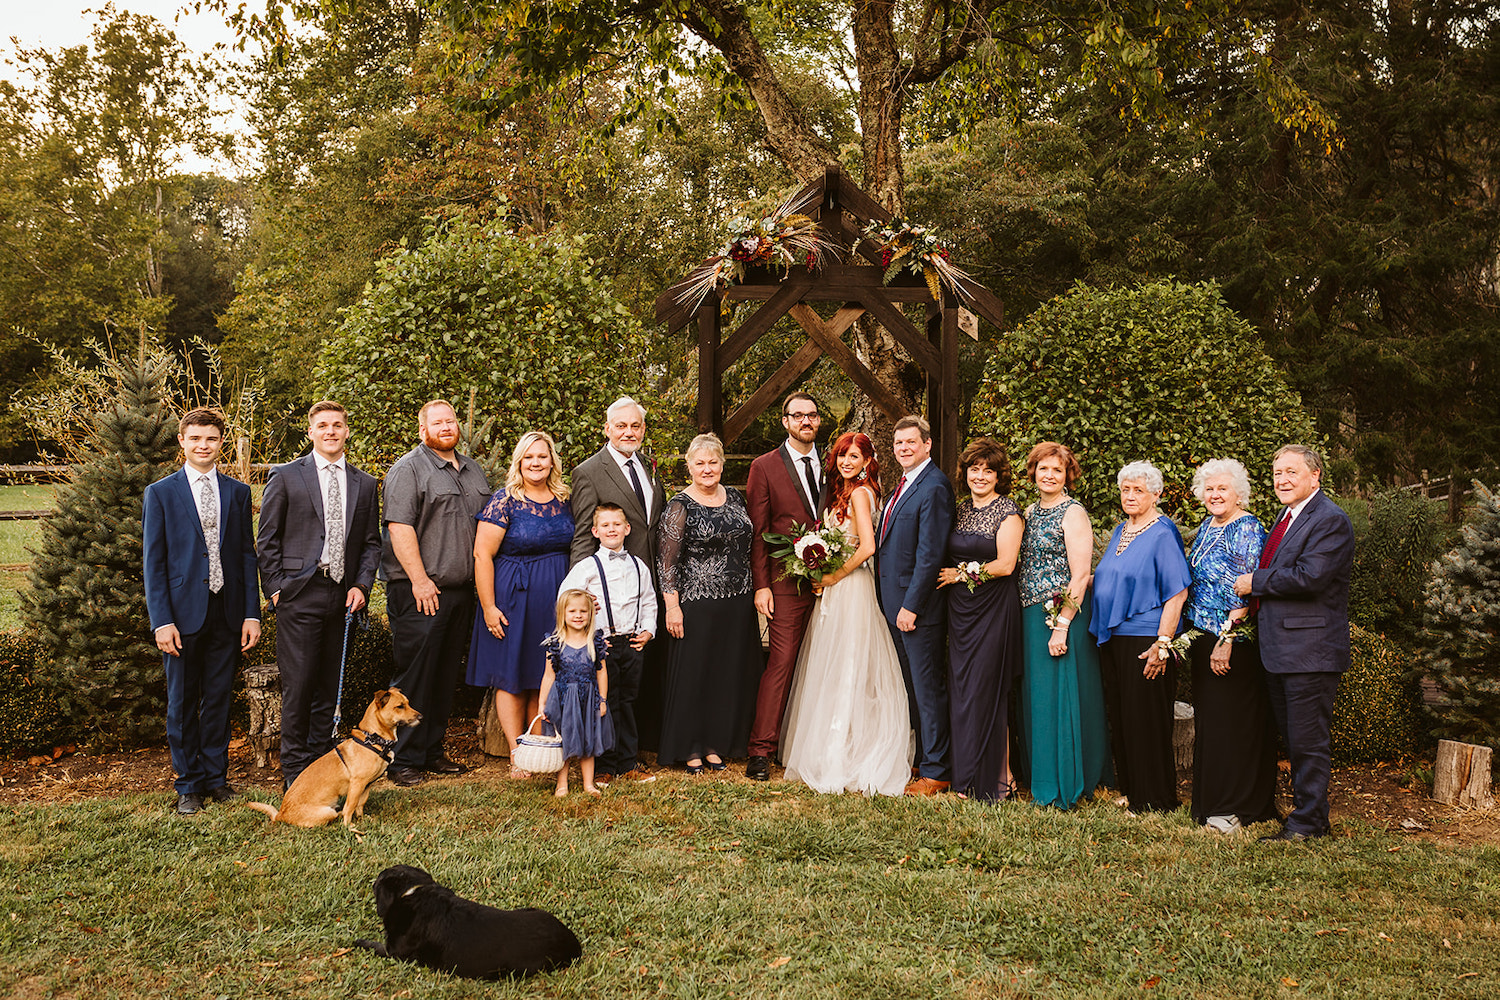 bride and groom pose with their family members and dogs in front of the wooden arch ceremony structure